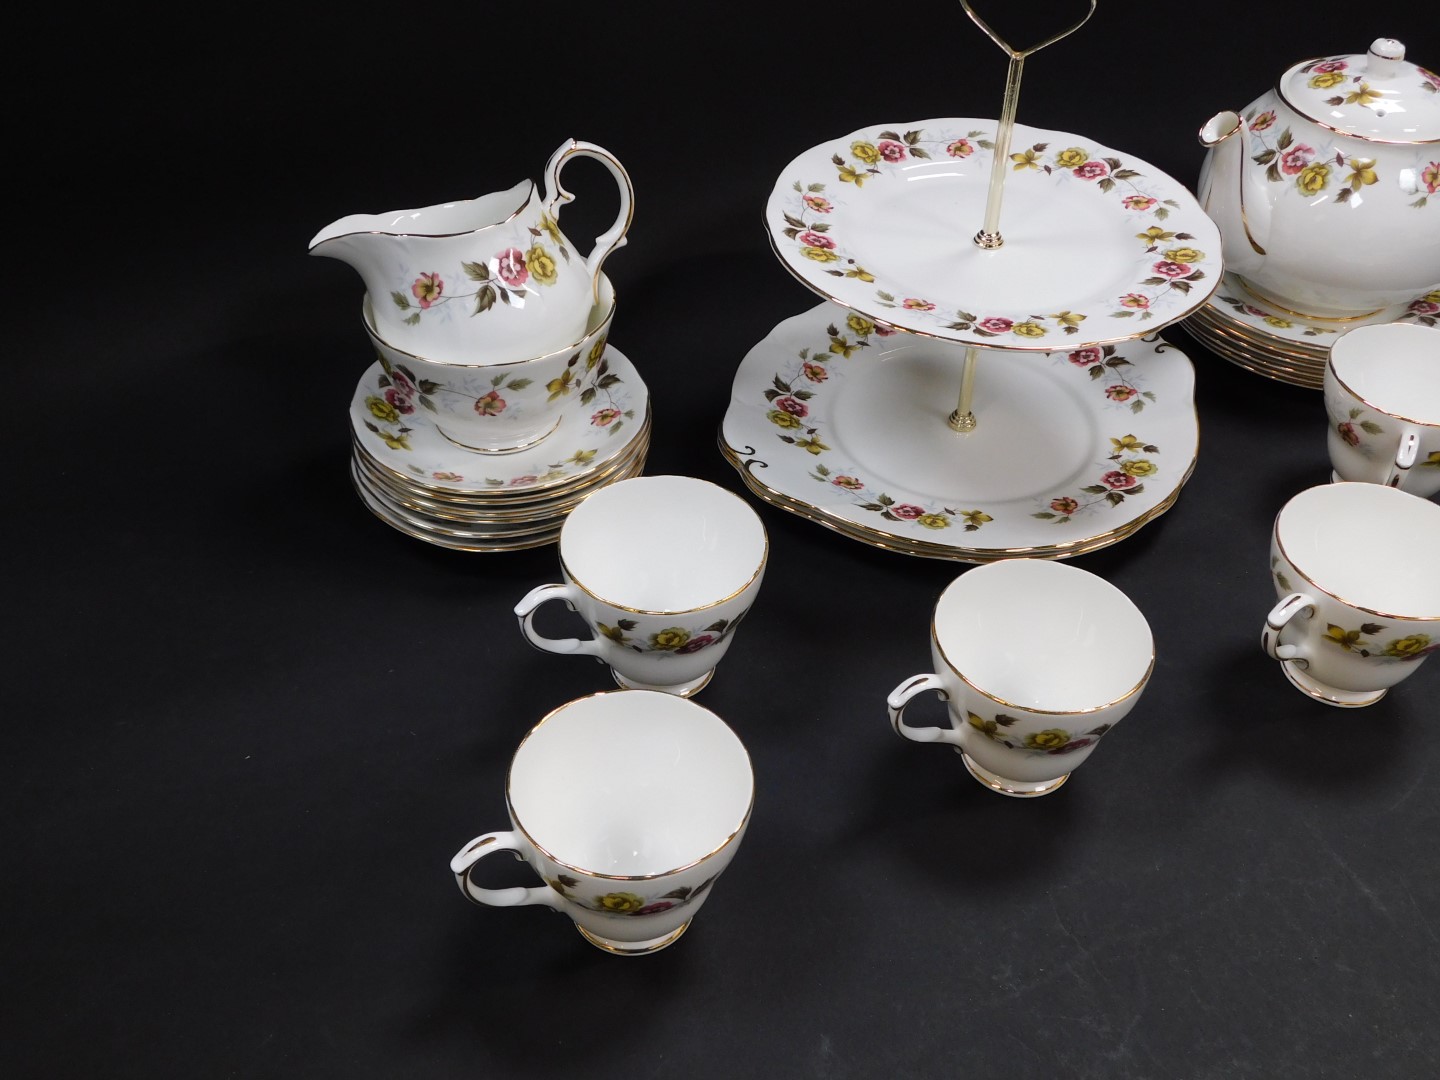 A Duchess china part tea service decorated in the Romance pattern, comprising two tier cake stand, c - Image 3 of 4